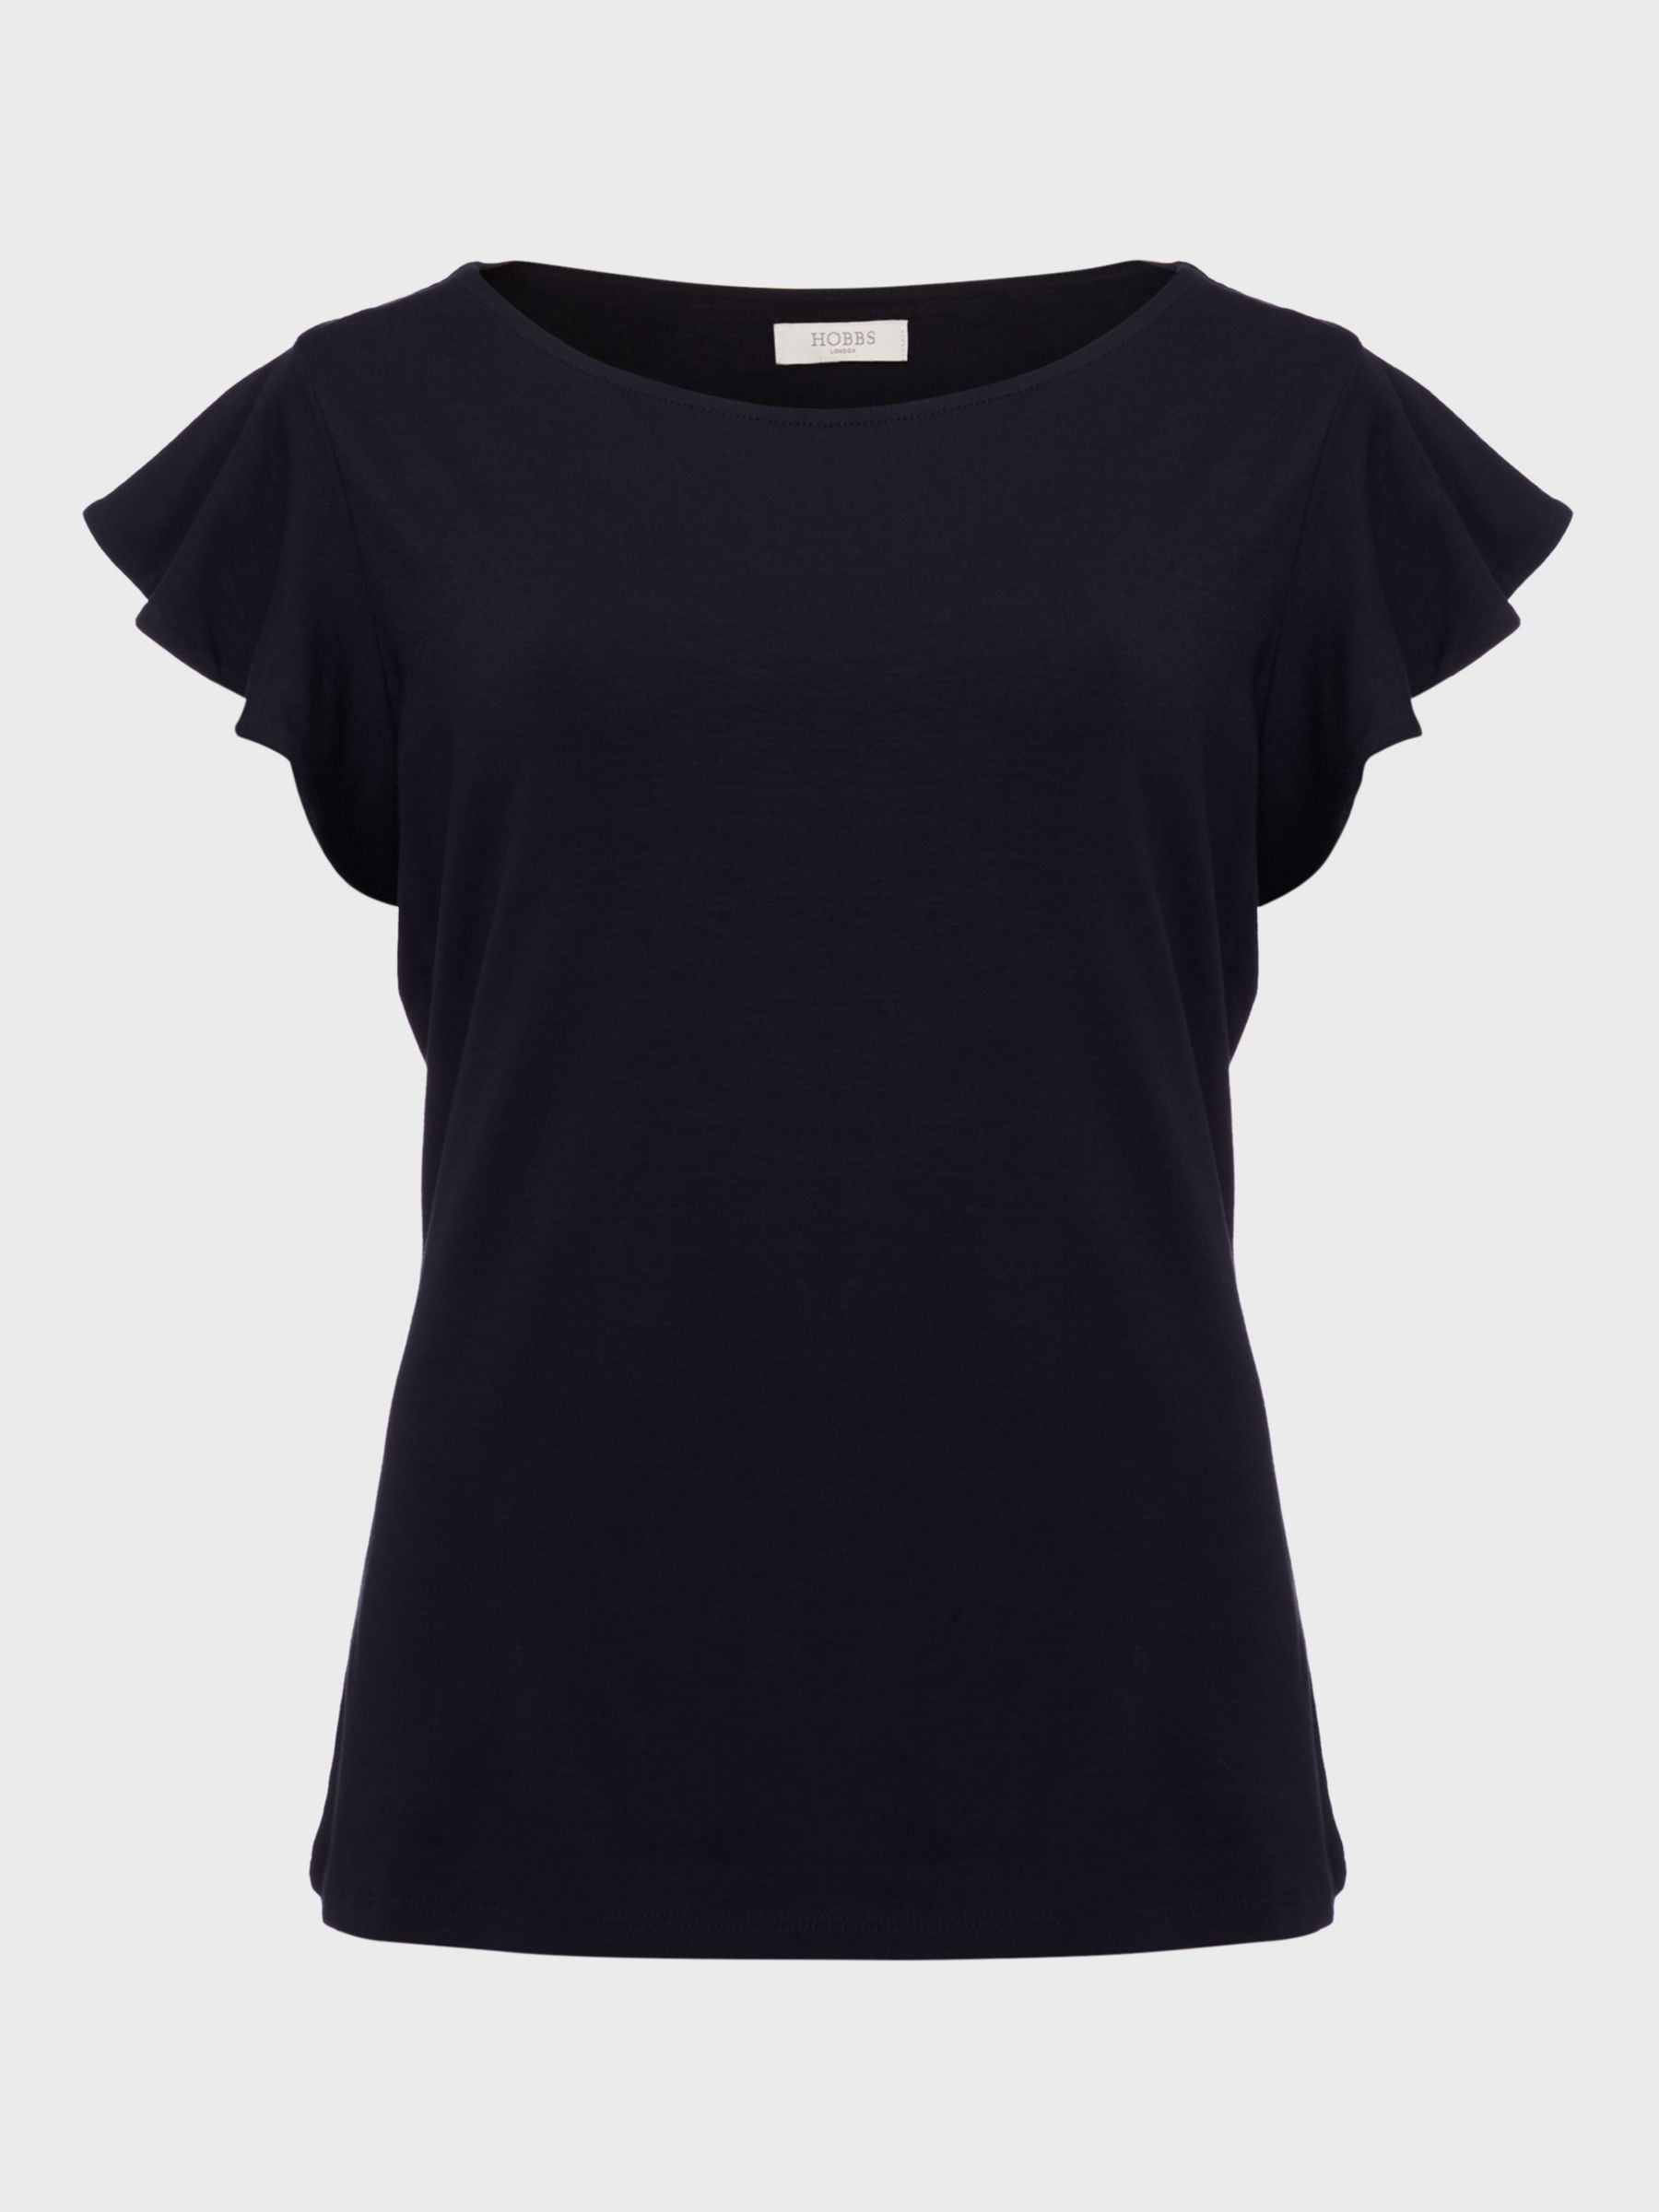 Hobbs Nessie Frill Sleeve Top, Navy at John Lewis & Partners